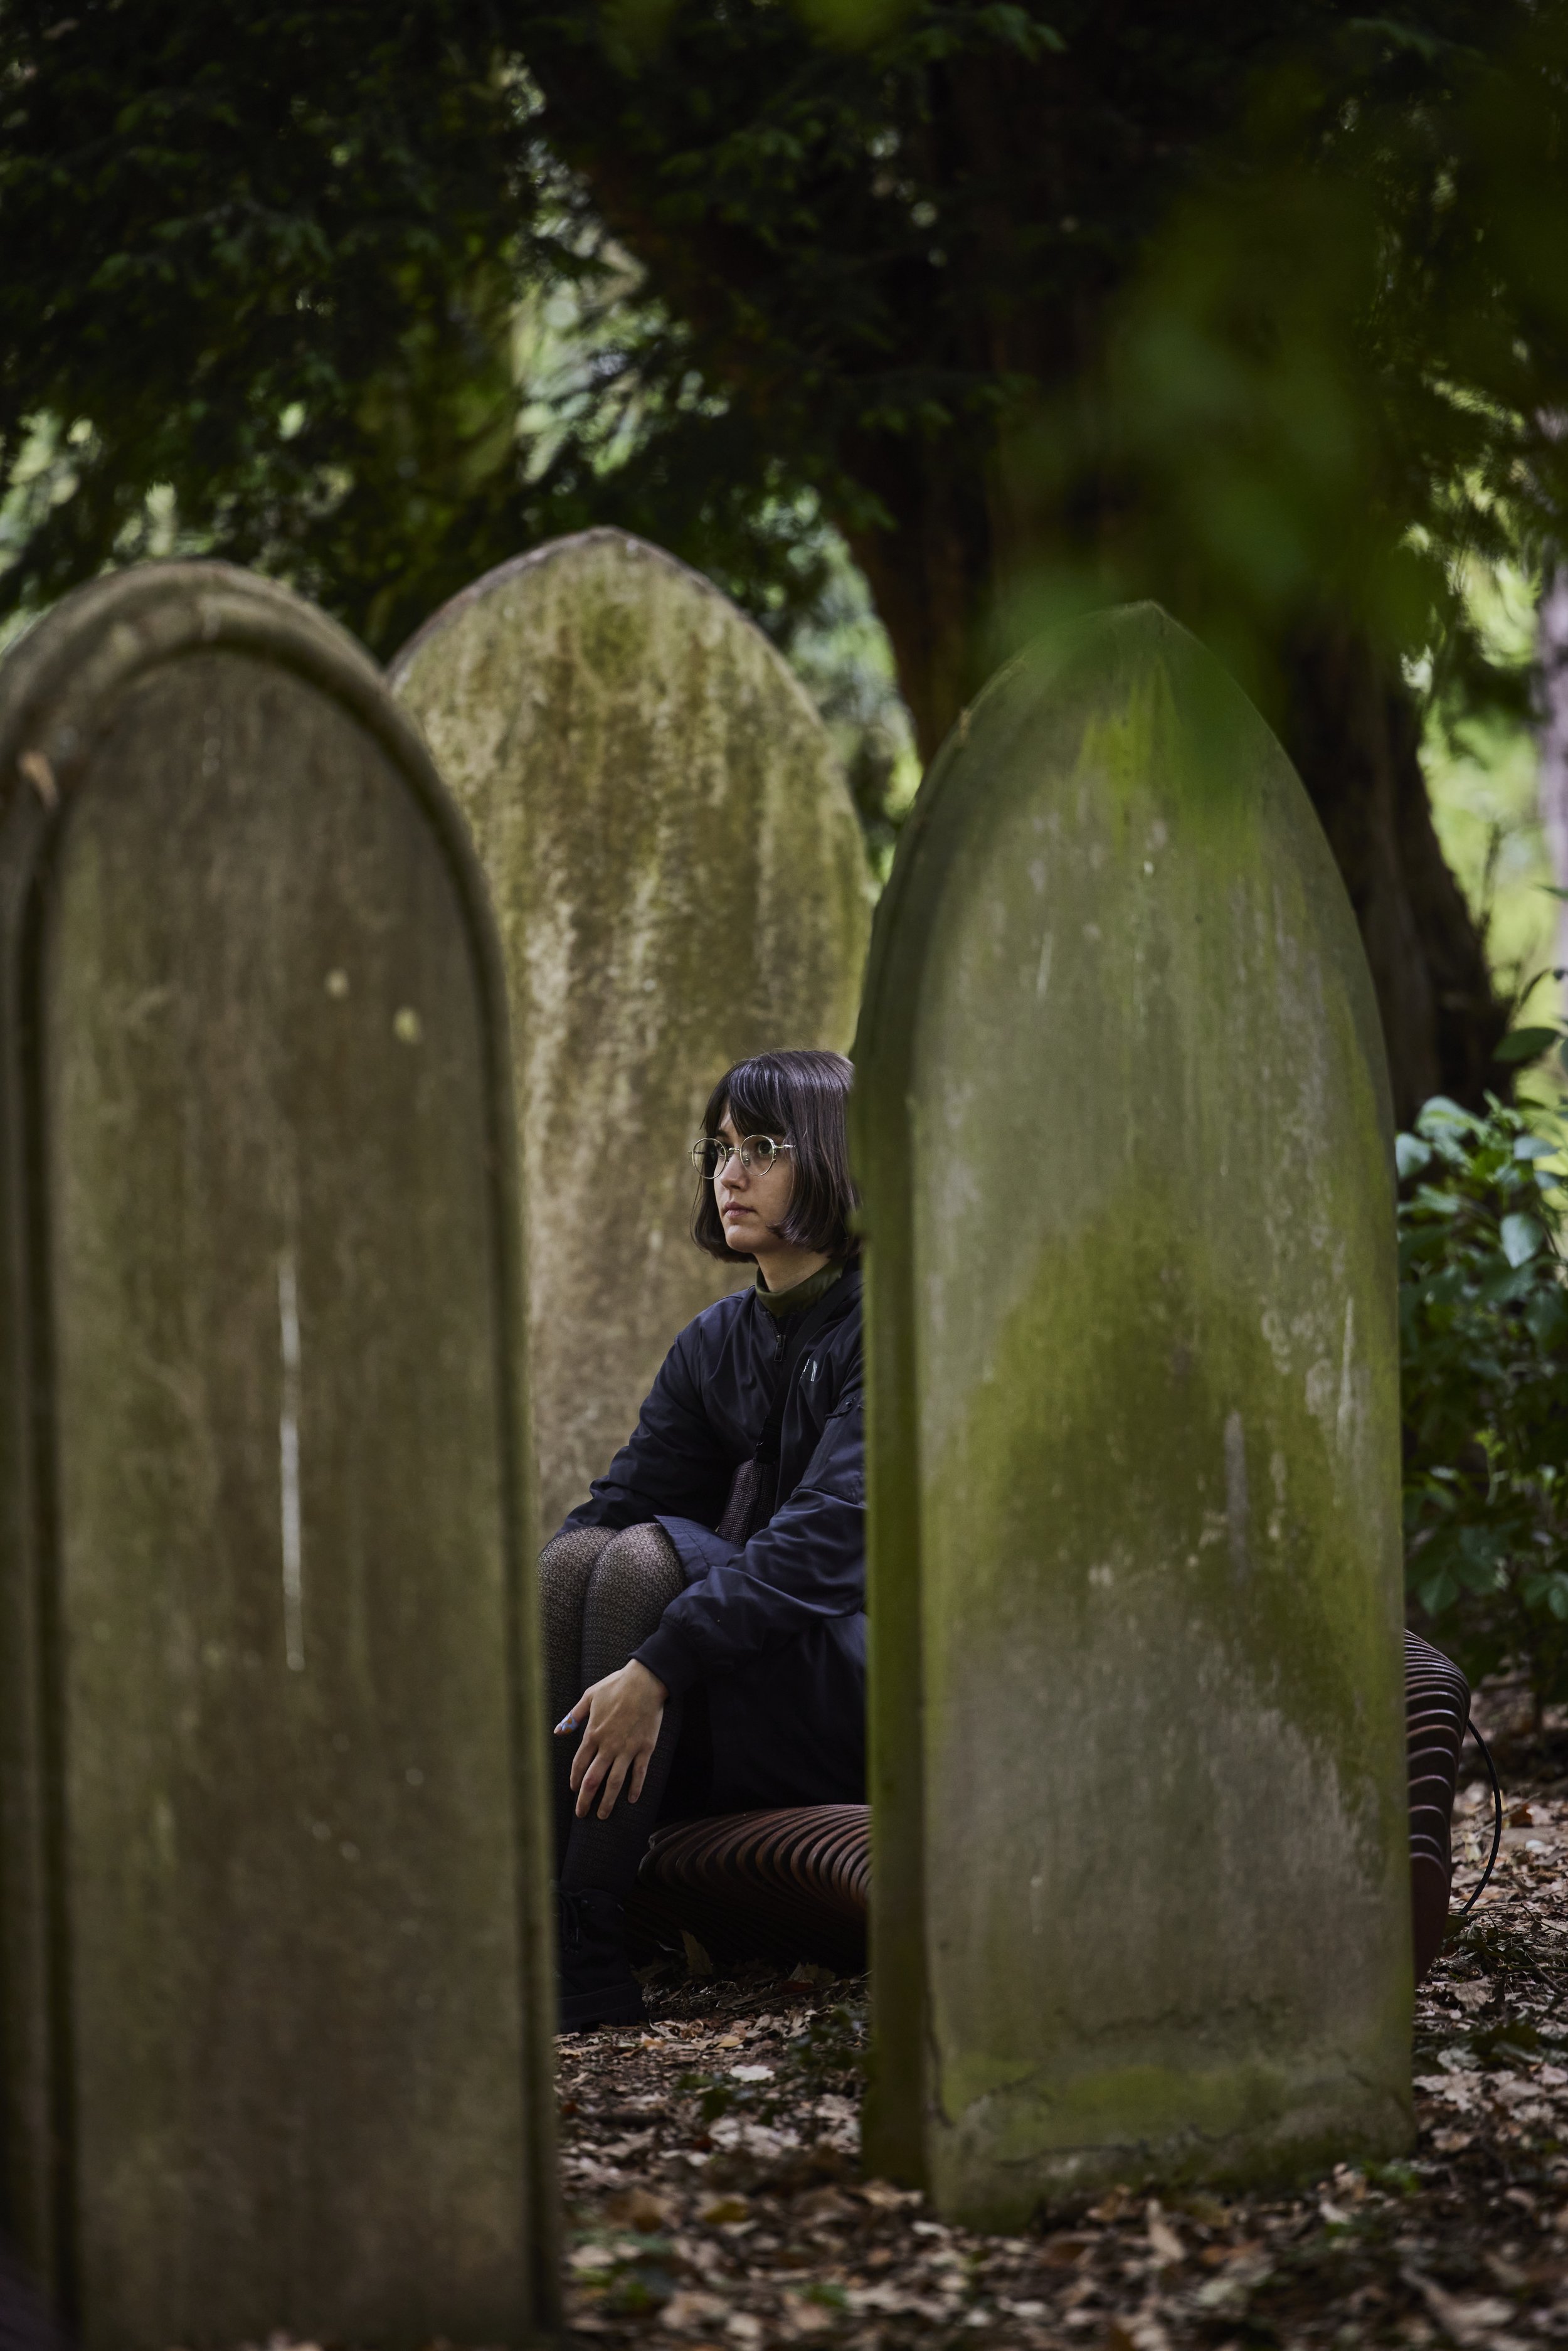 Observations on Being, London Road Cemetery (June 2021). Photograph: David Leven.